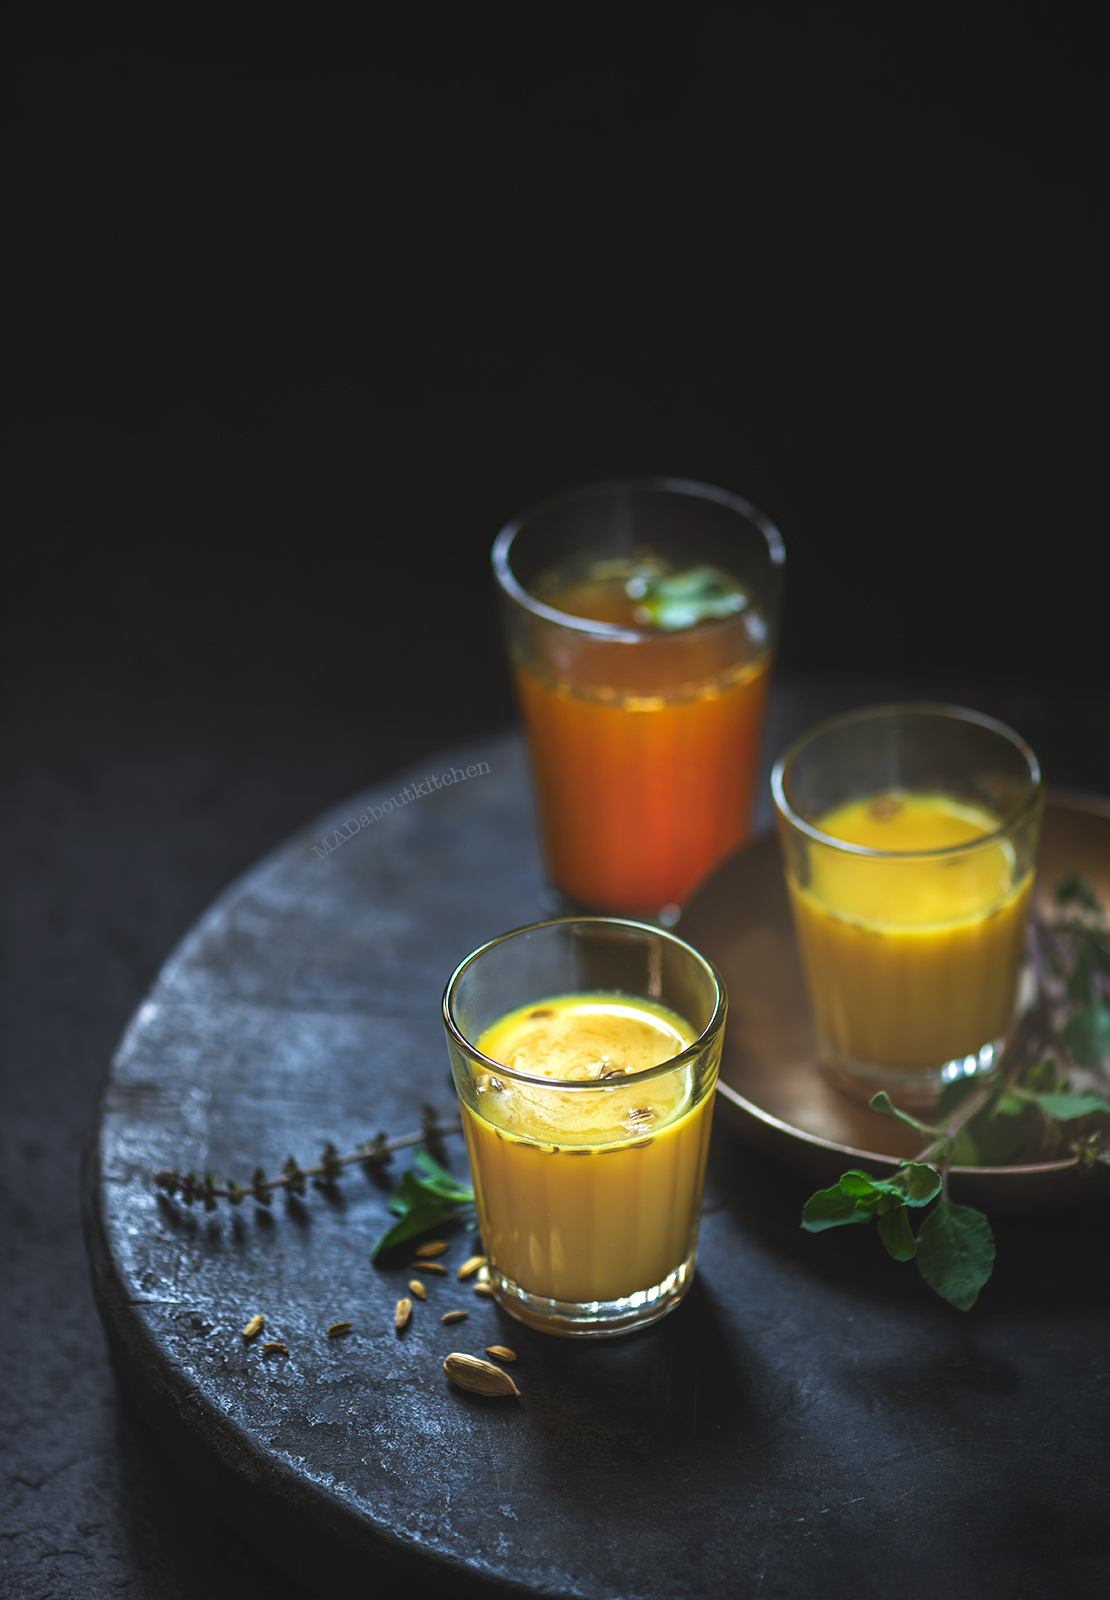 Kashāya or Kada , is a decoction of spices that helps build immunity and the drink that gives you relief from cold and cough when had regularly.